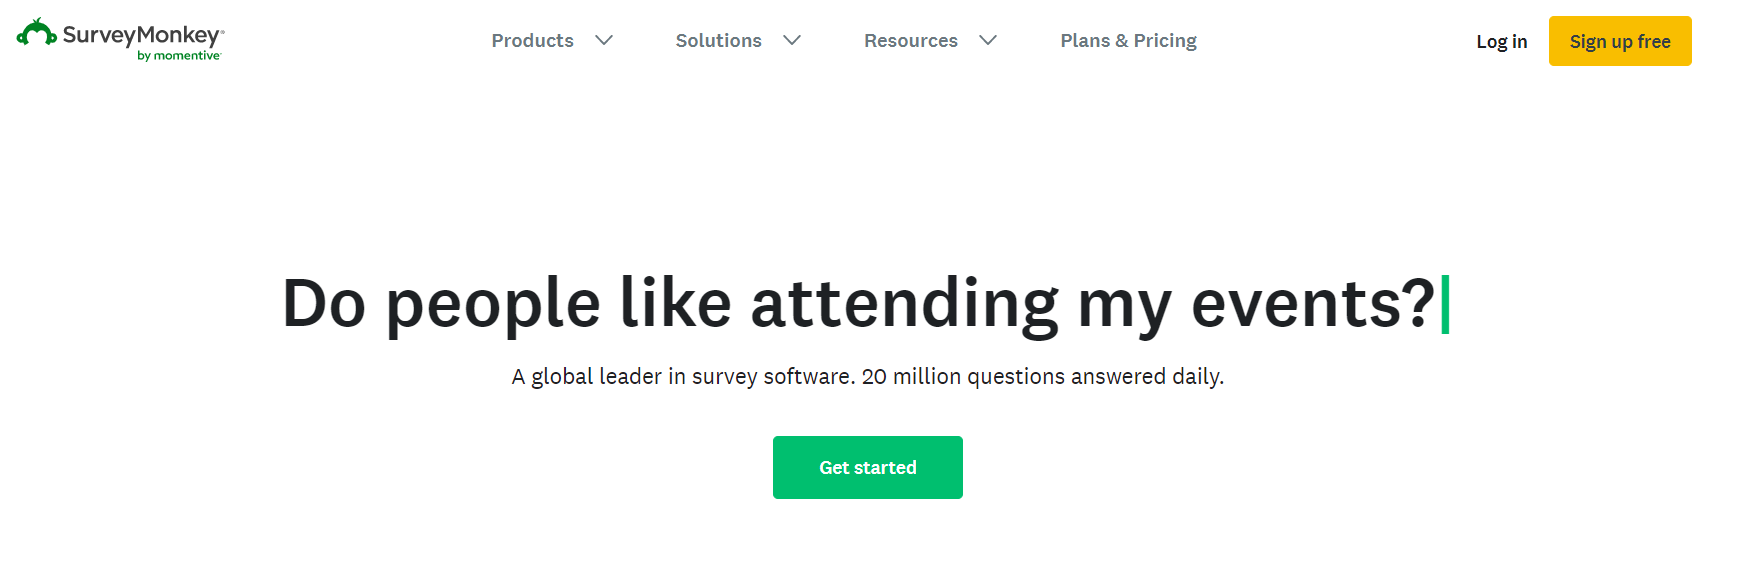 The image is of the SurveyMonkey homepage, a CSAT tool for measuring customer satisfaction.